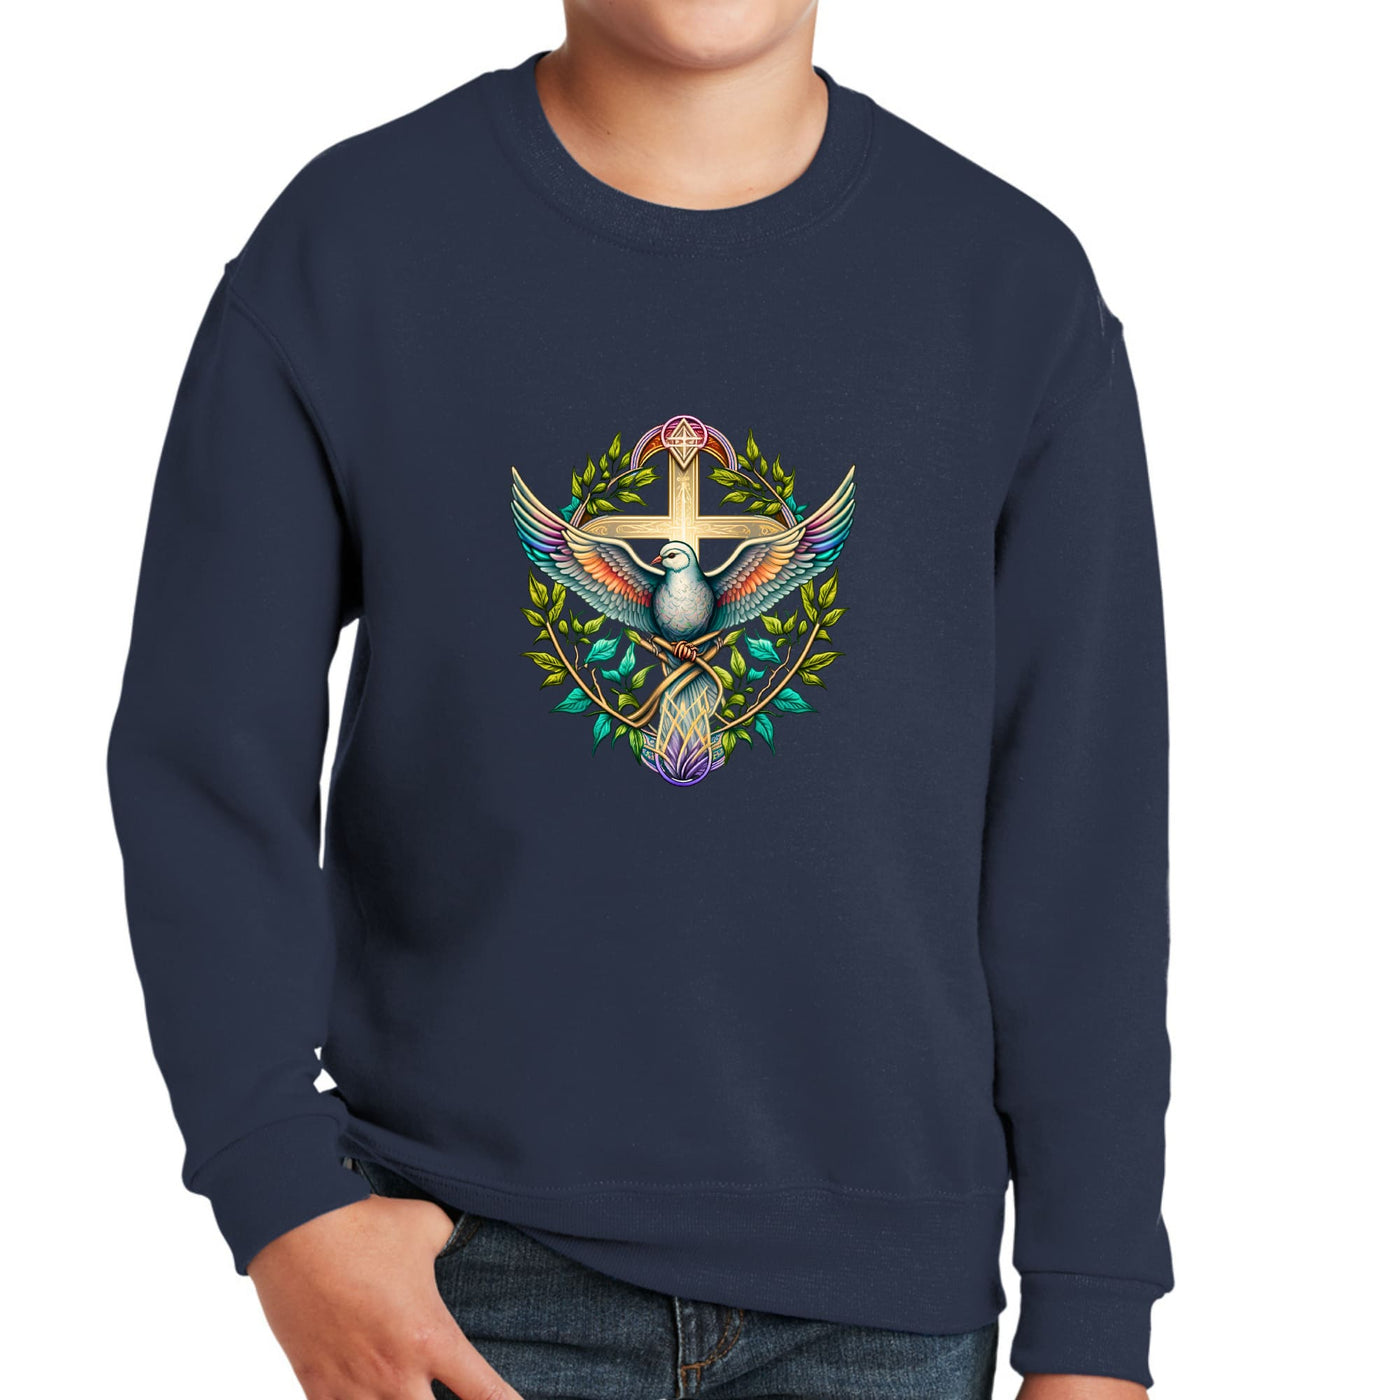 Youth Graphic Sweatshirt Blue Green Multicolor Dove Floral - Youth | Sweatshirts